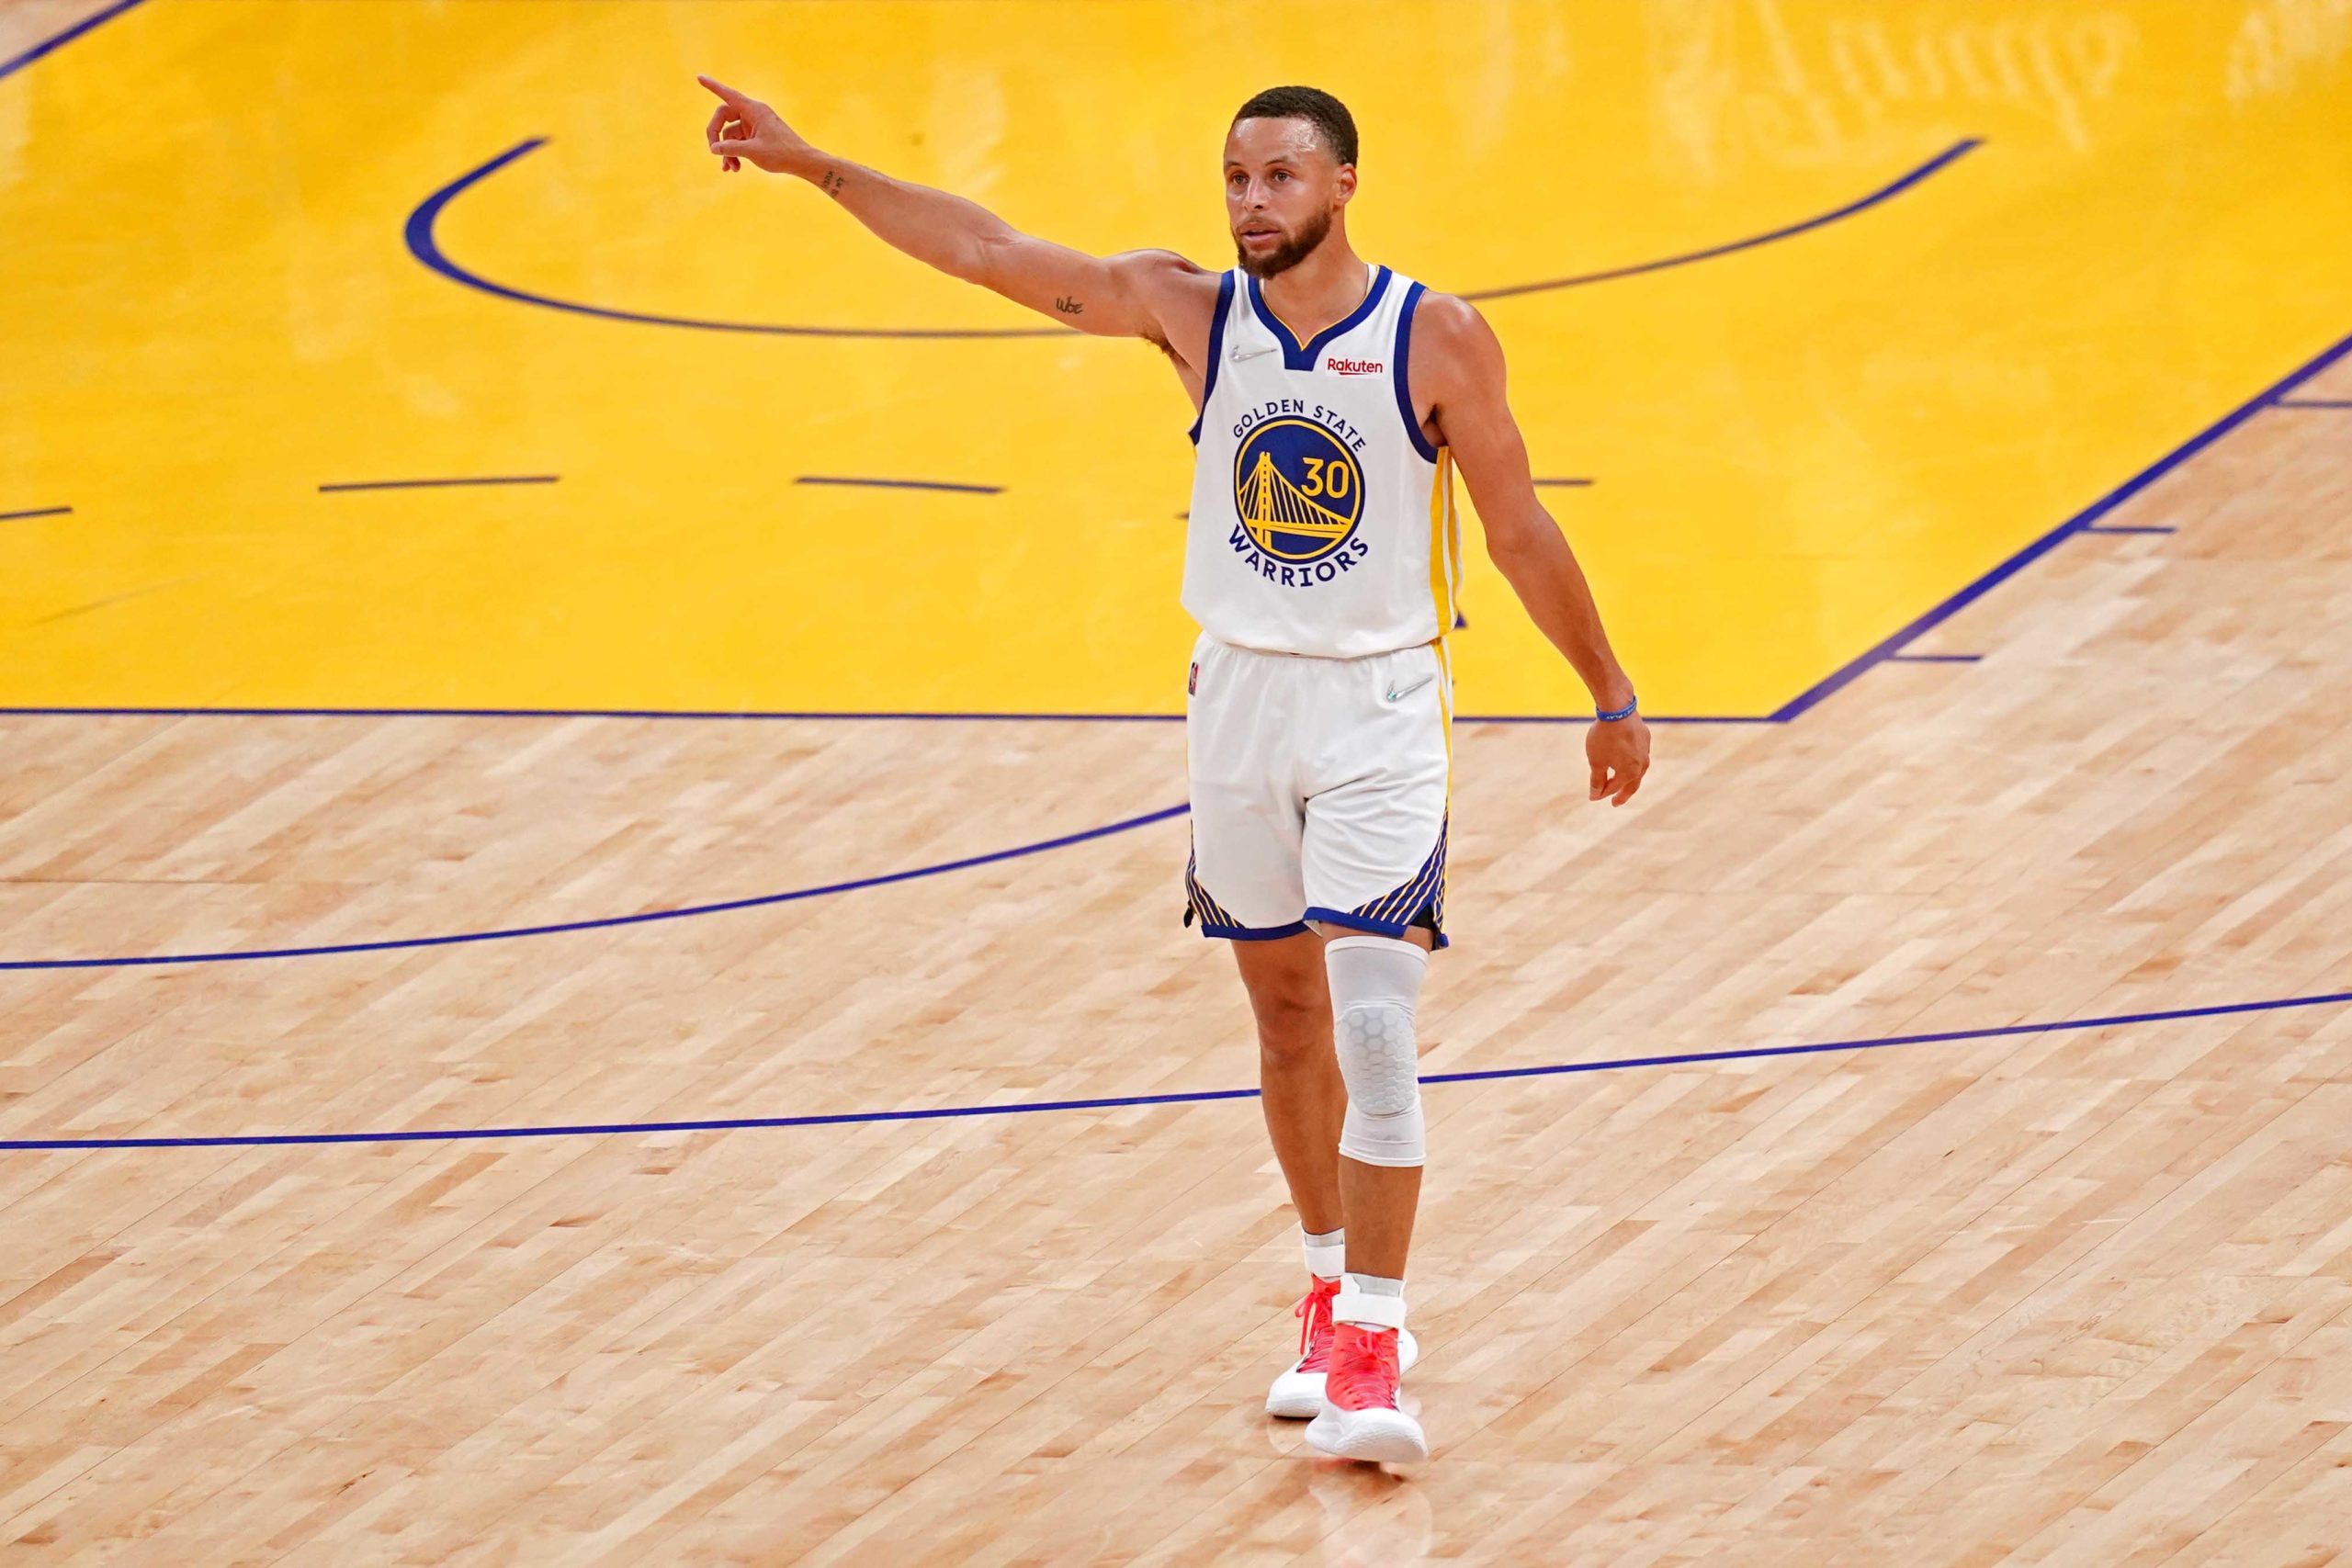 Jun 5, 2022; San Francisco, California, USA; Golden State Warriors guard Stephen Curry (30) reacts after a play against the Boston Celtics during game two of the 2022 NBA Finals at Chase Center. Mandatory Credit: Cary Edmondson-USA TODAY Sports